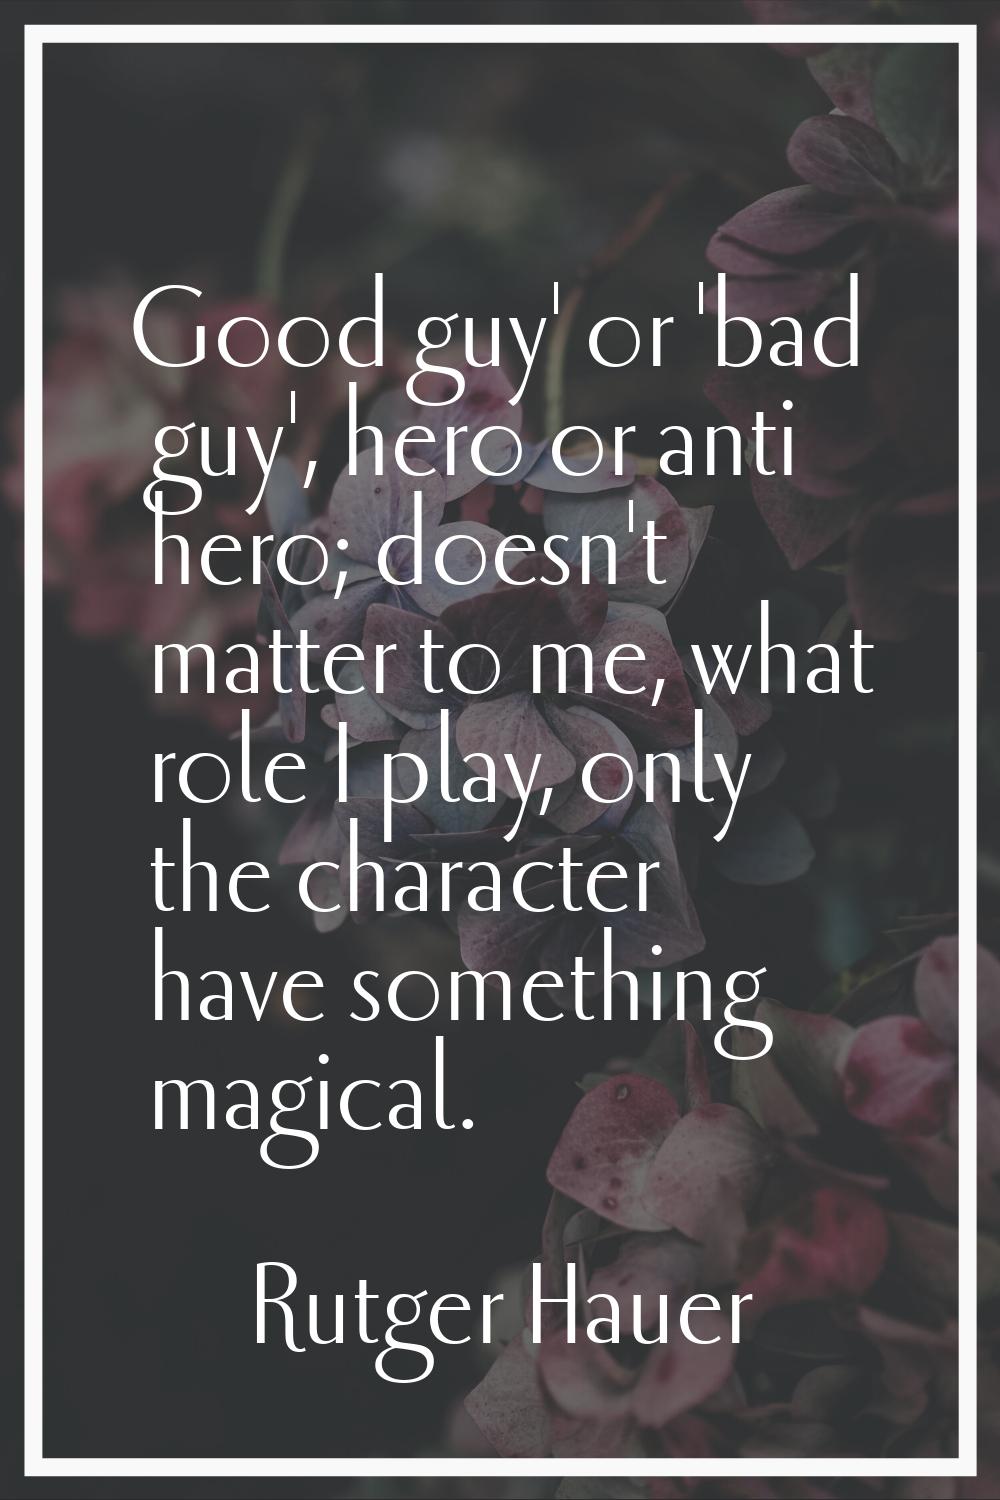 Good guy' or 'bad guy', hero or anti hero; doesn't matter to me, what role I play, only the charact